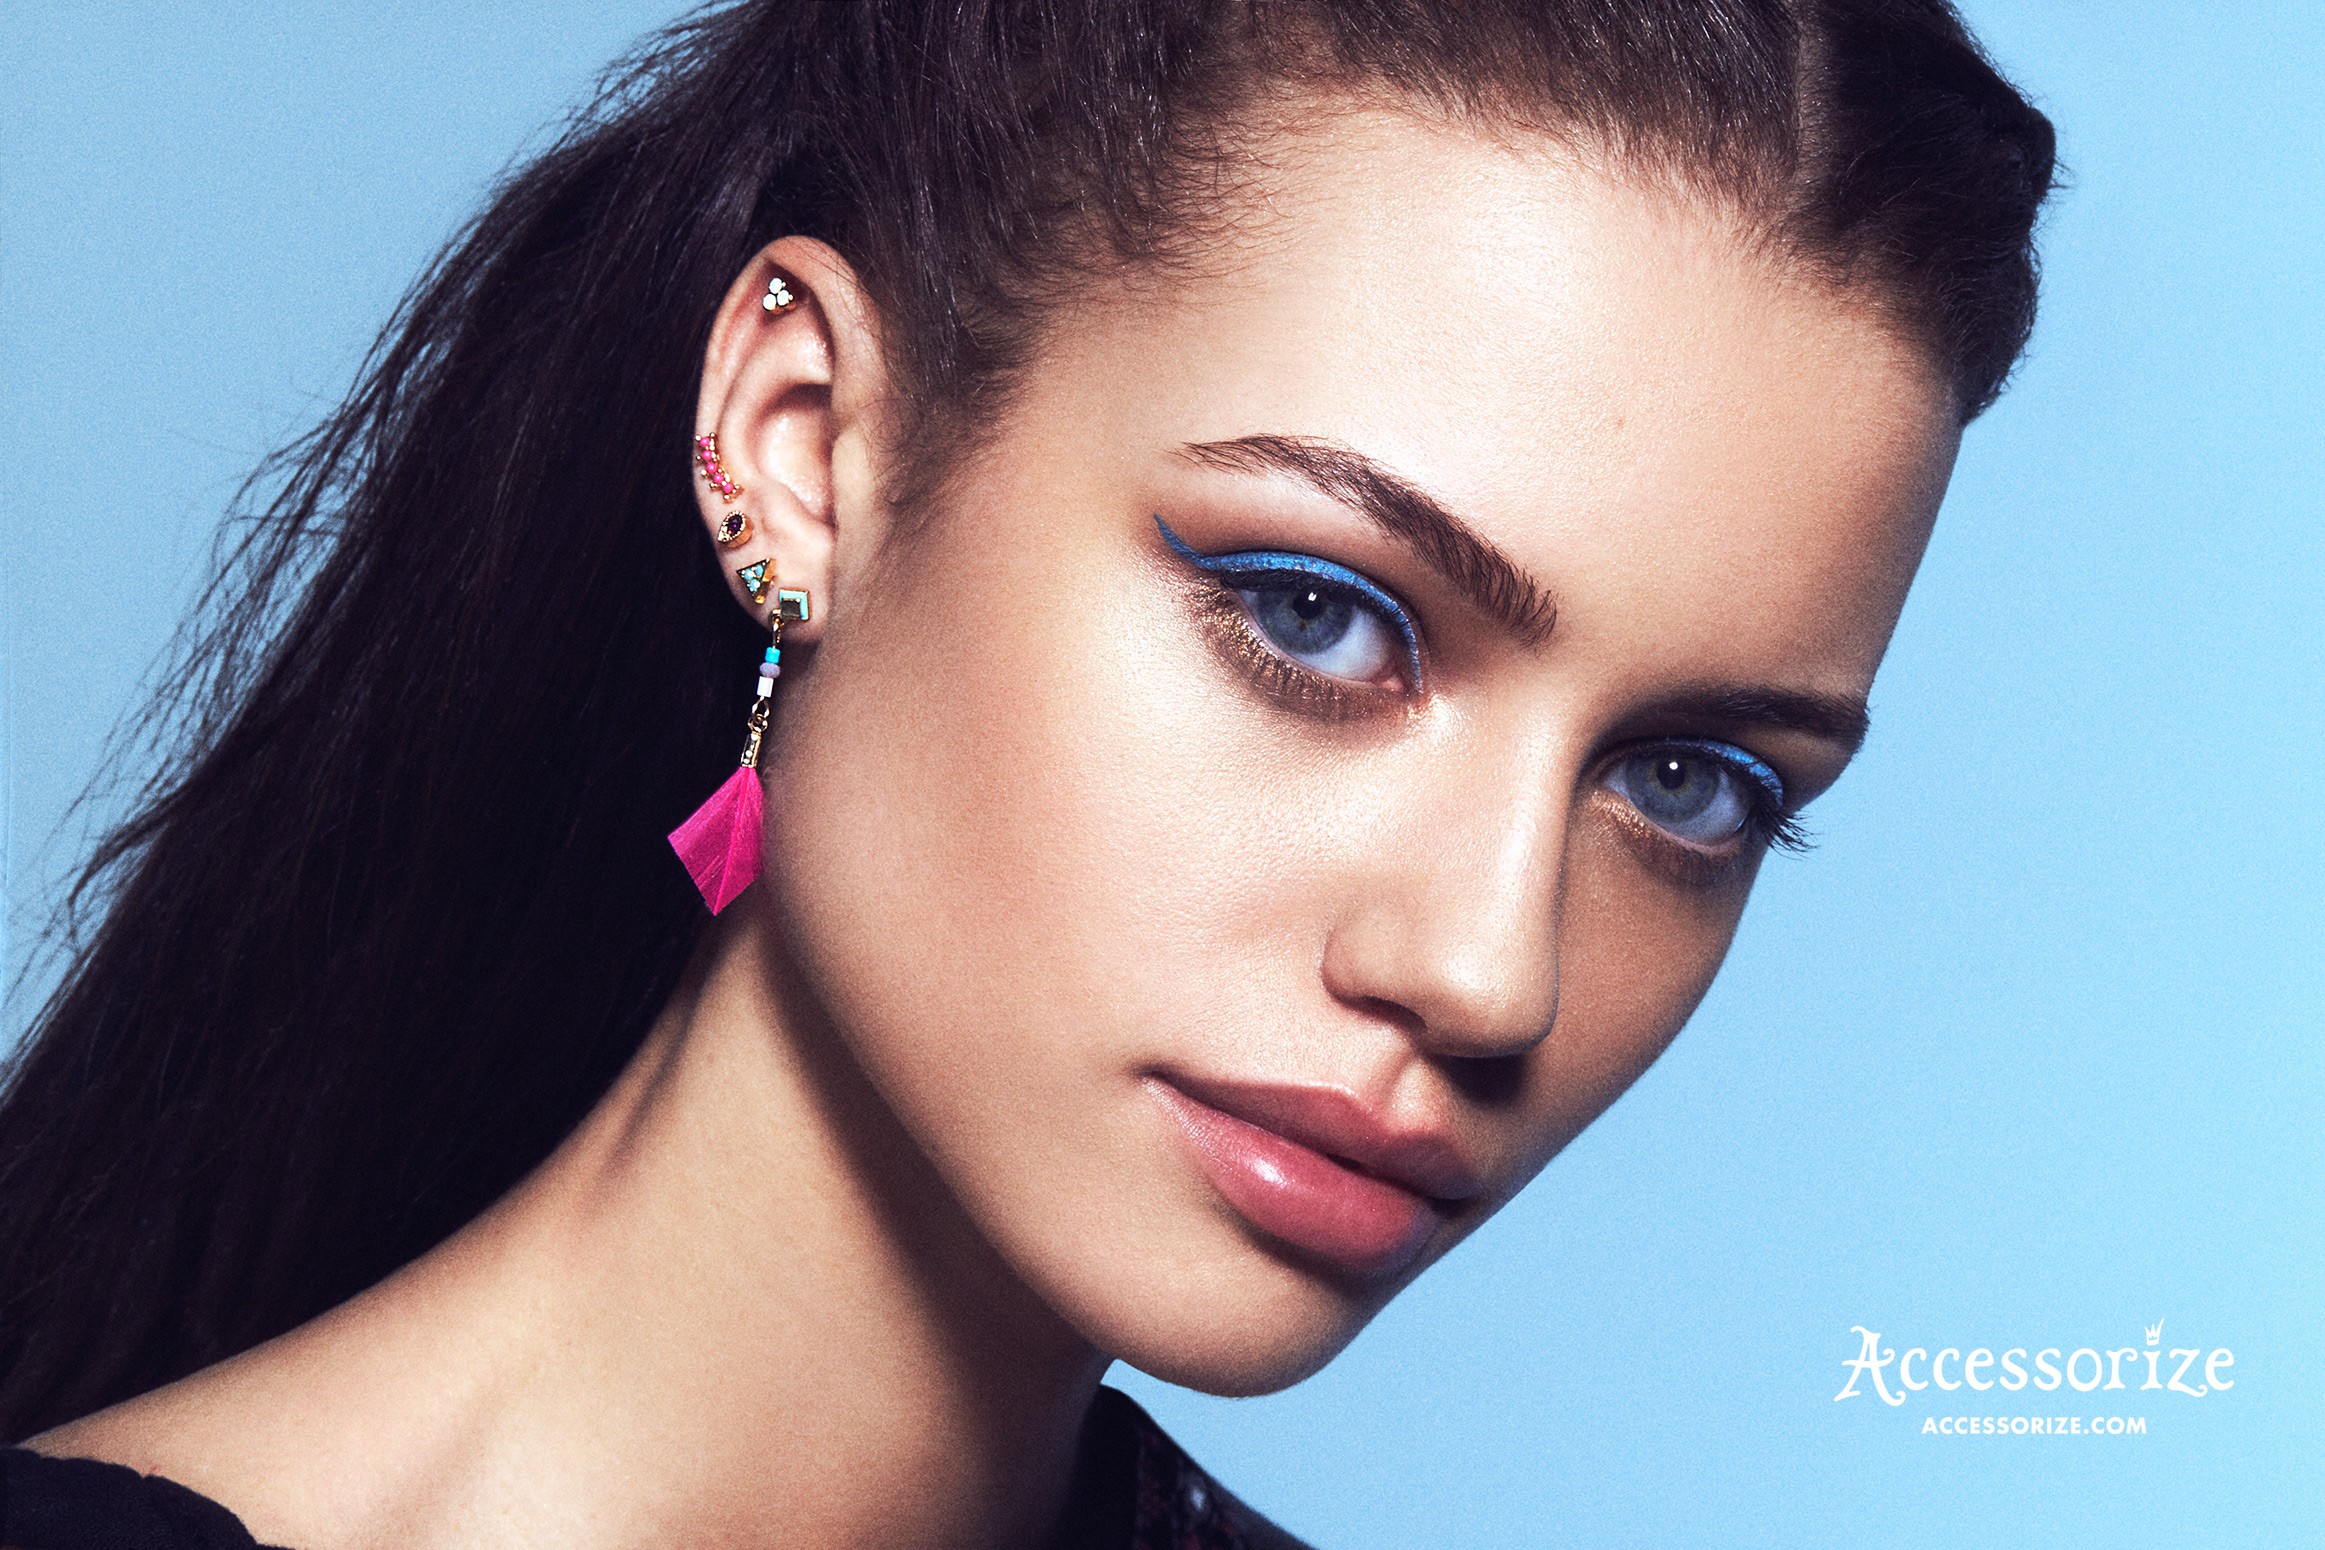 accessorize-campaign-jewellery-ear-cuff-earring-ruth-rose-beauty-pink-8